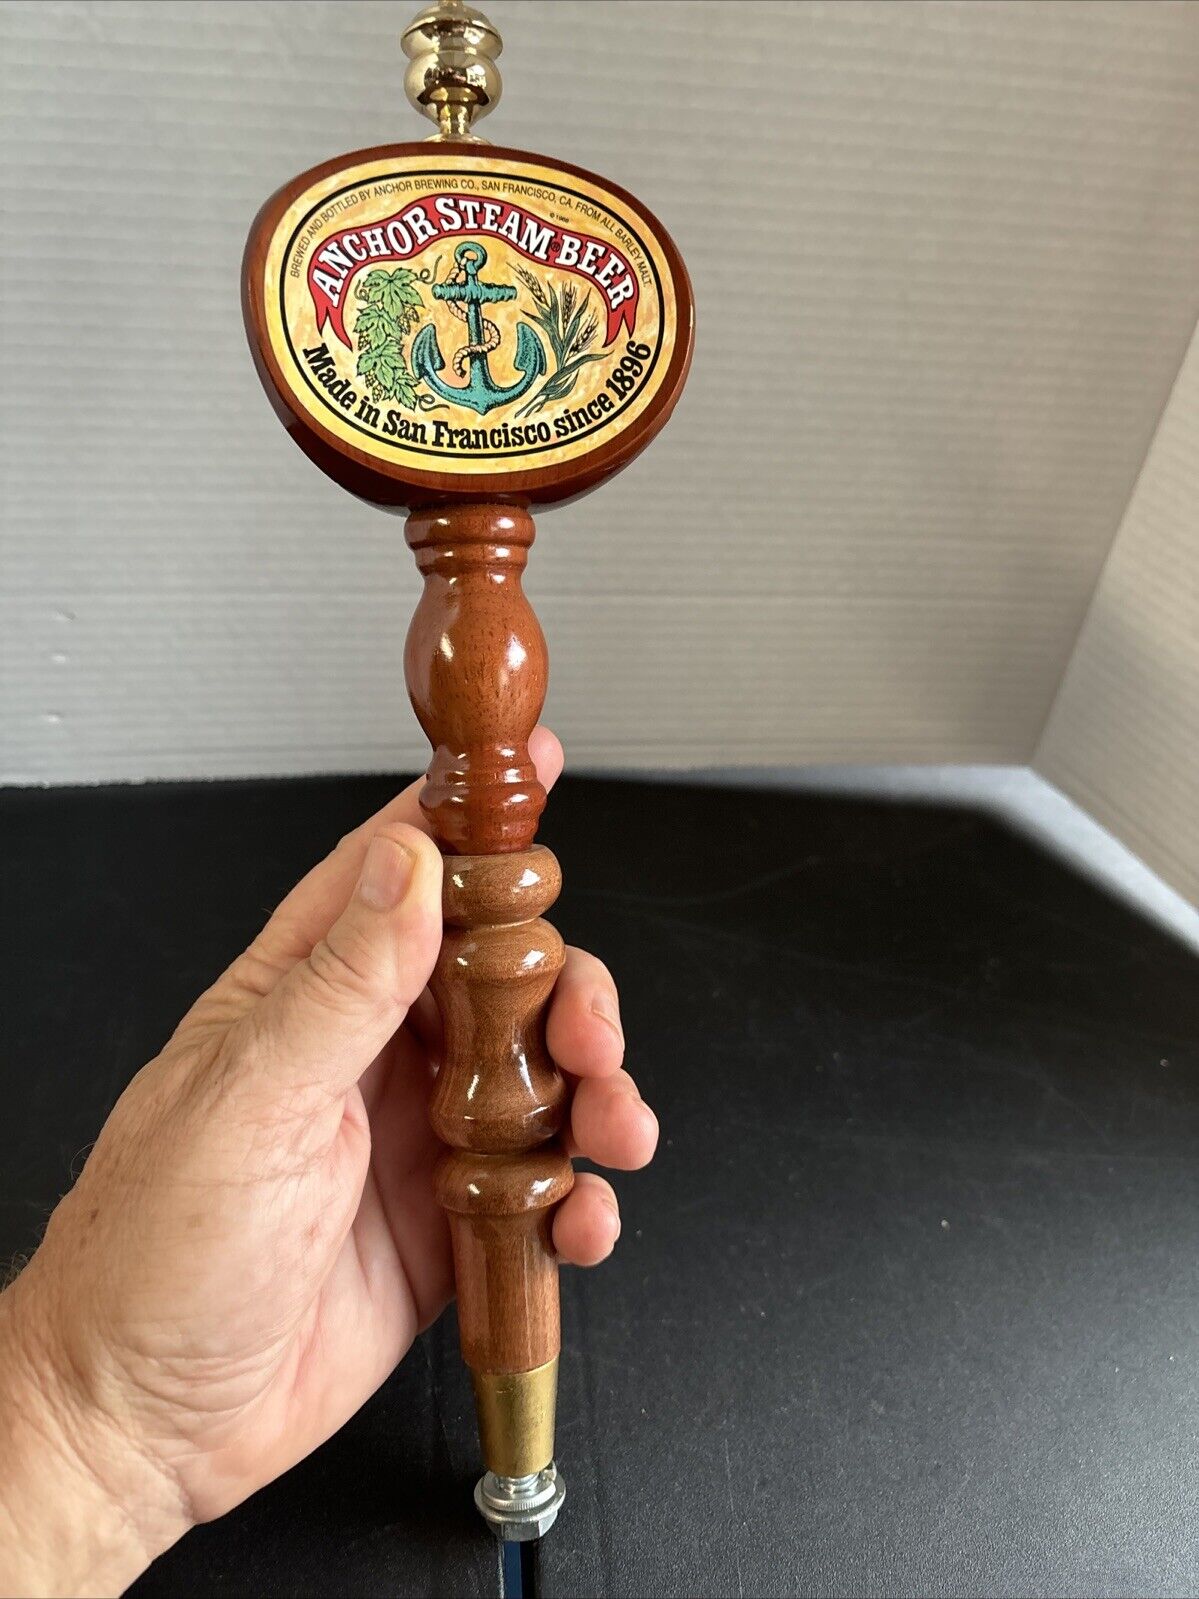 Anchor Steam Beer Tap Handle By Anchor Brewing Company  San Francisco Vintage